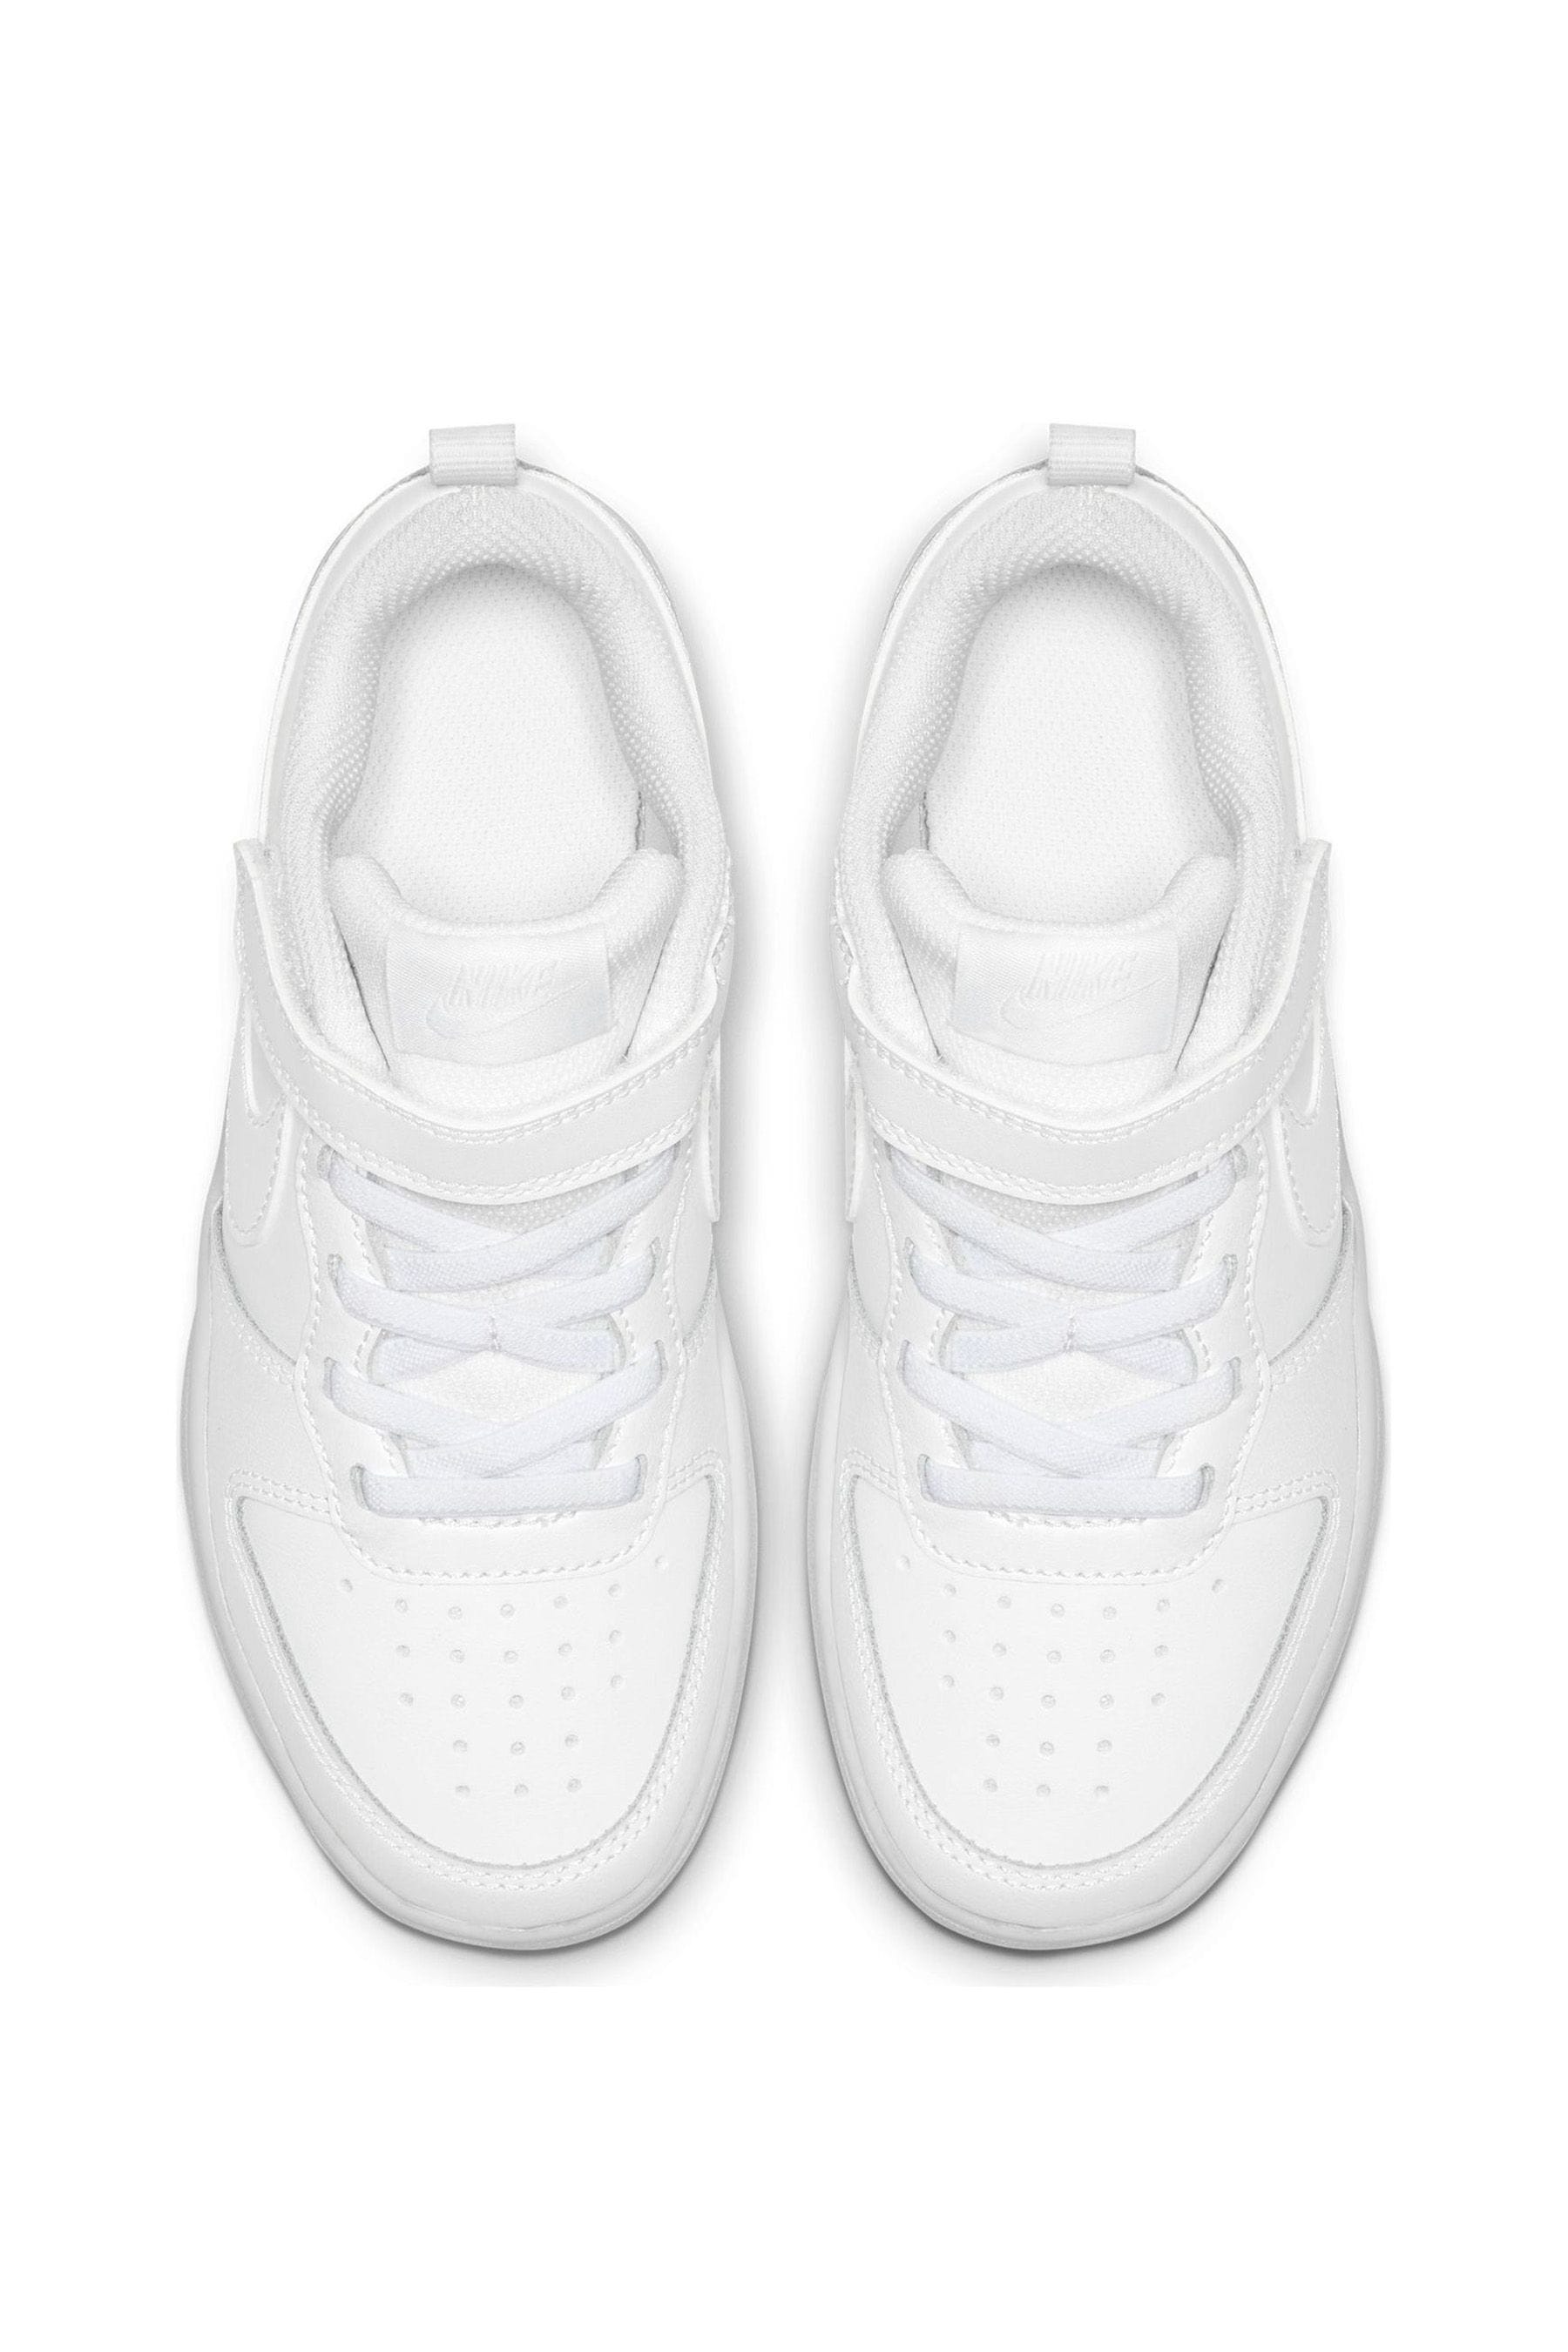 Buy Nike White Junior Court Borough Low Trainers from the Next UK ...